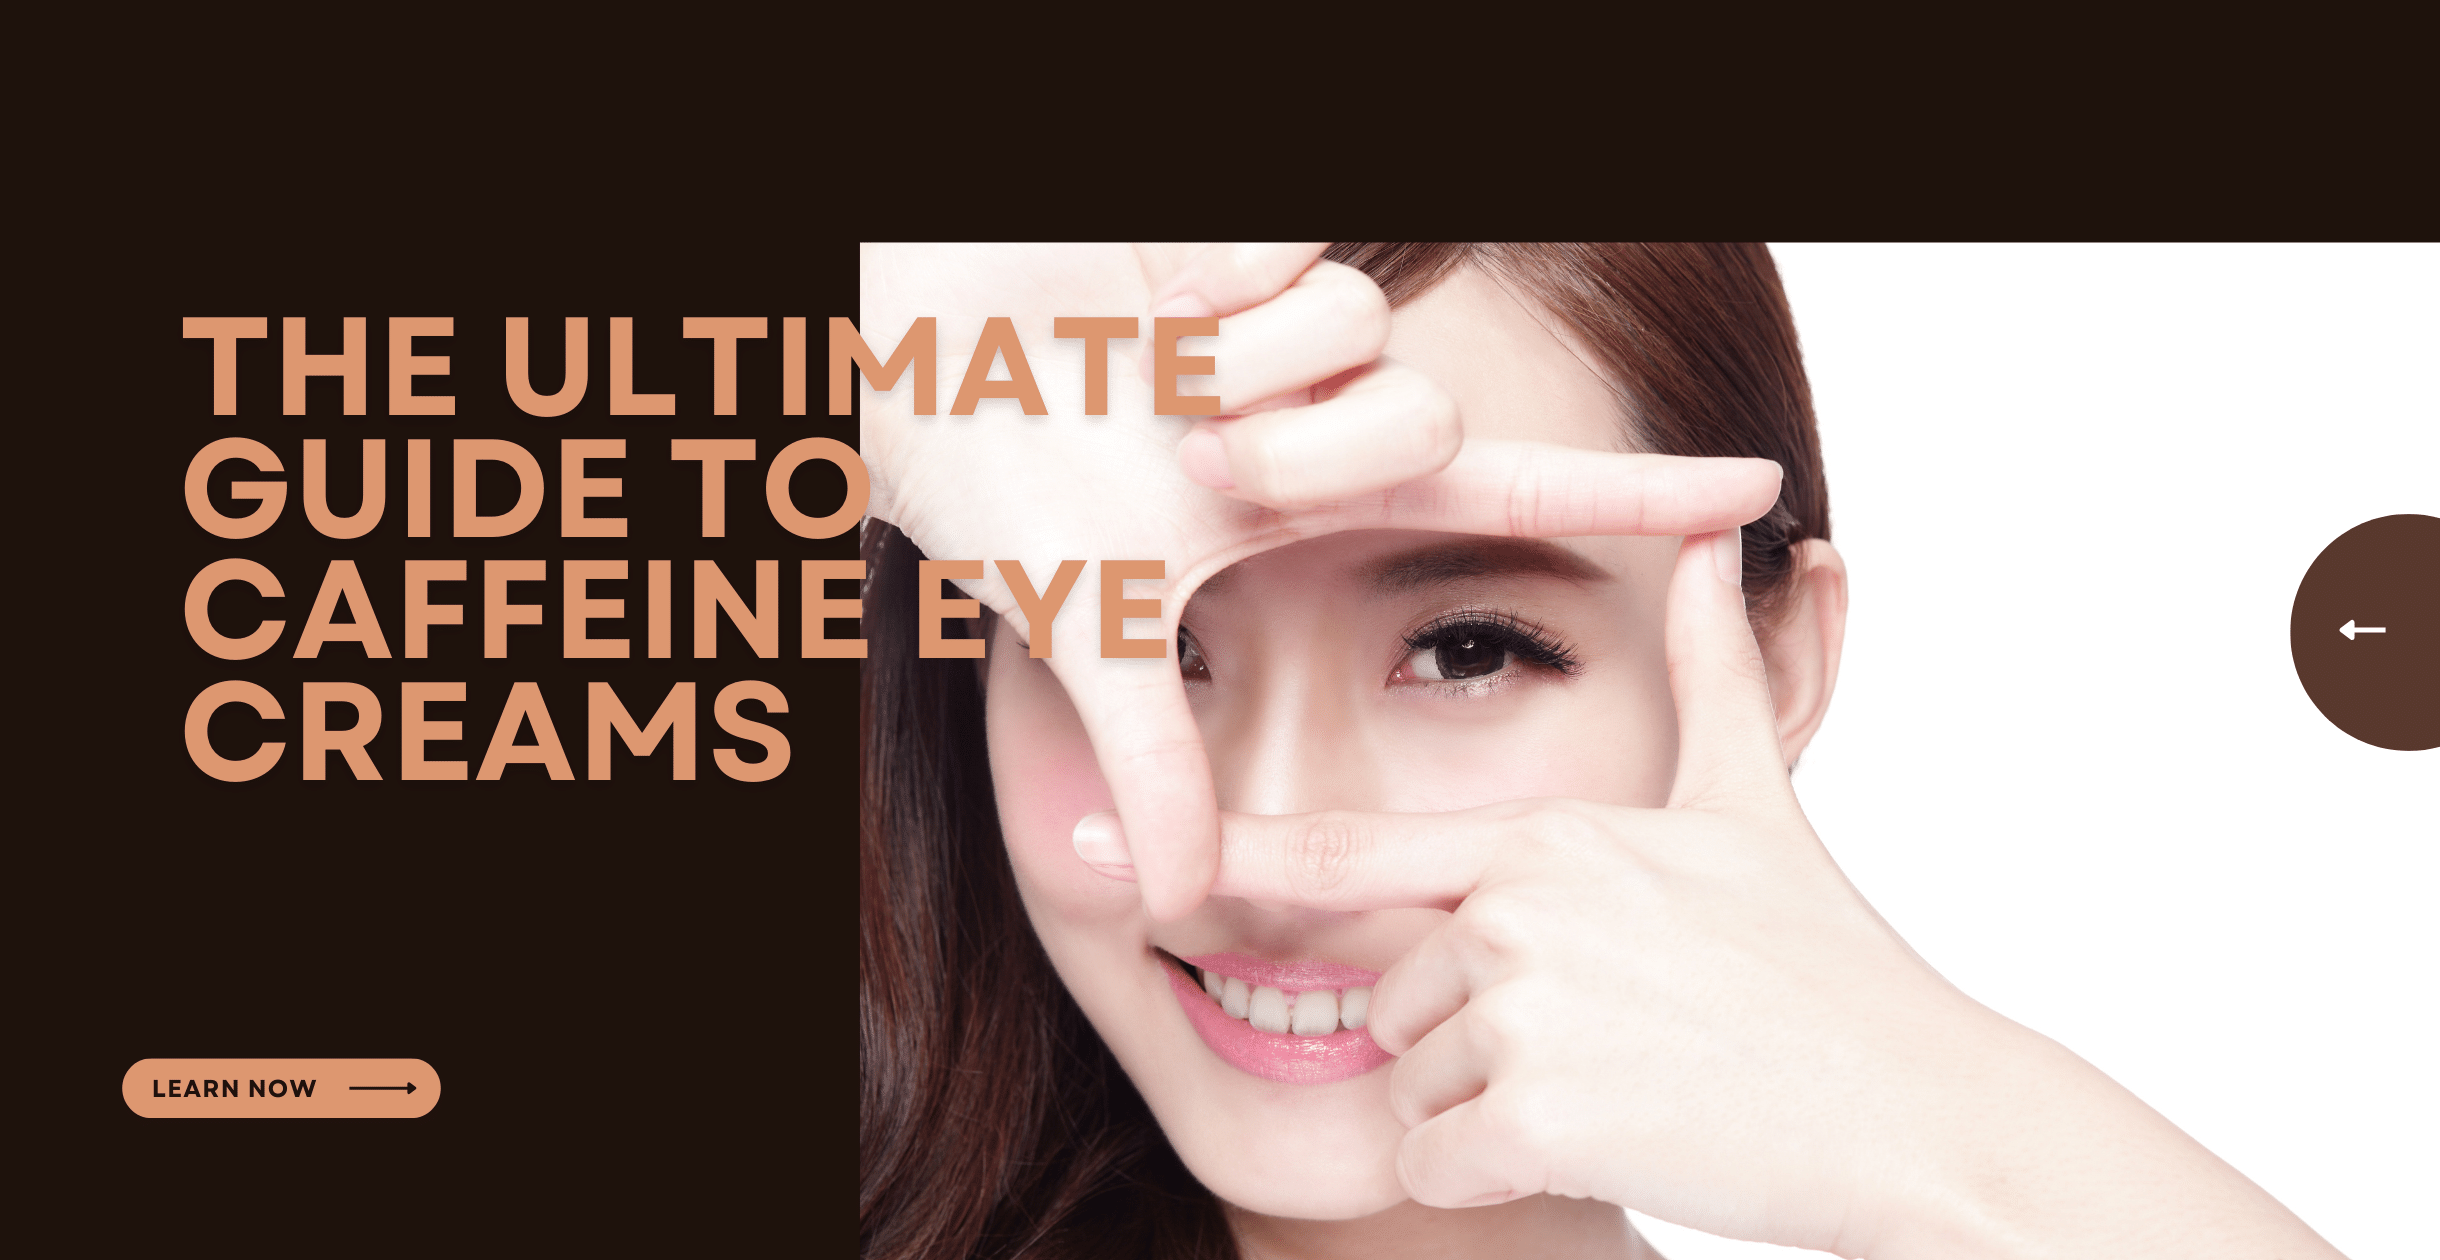 Revitalise Your Eyes: The Ultimate Guide to Caffeine Eye Creams